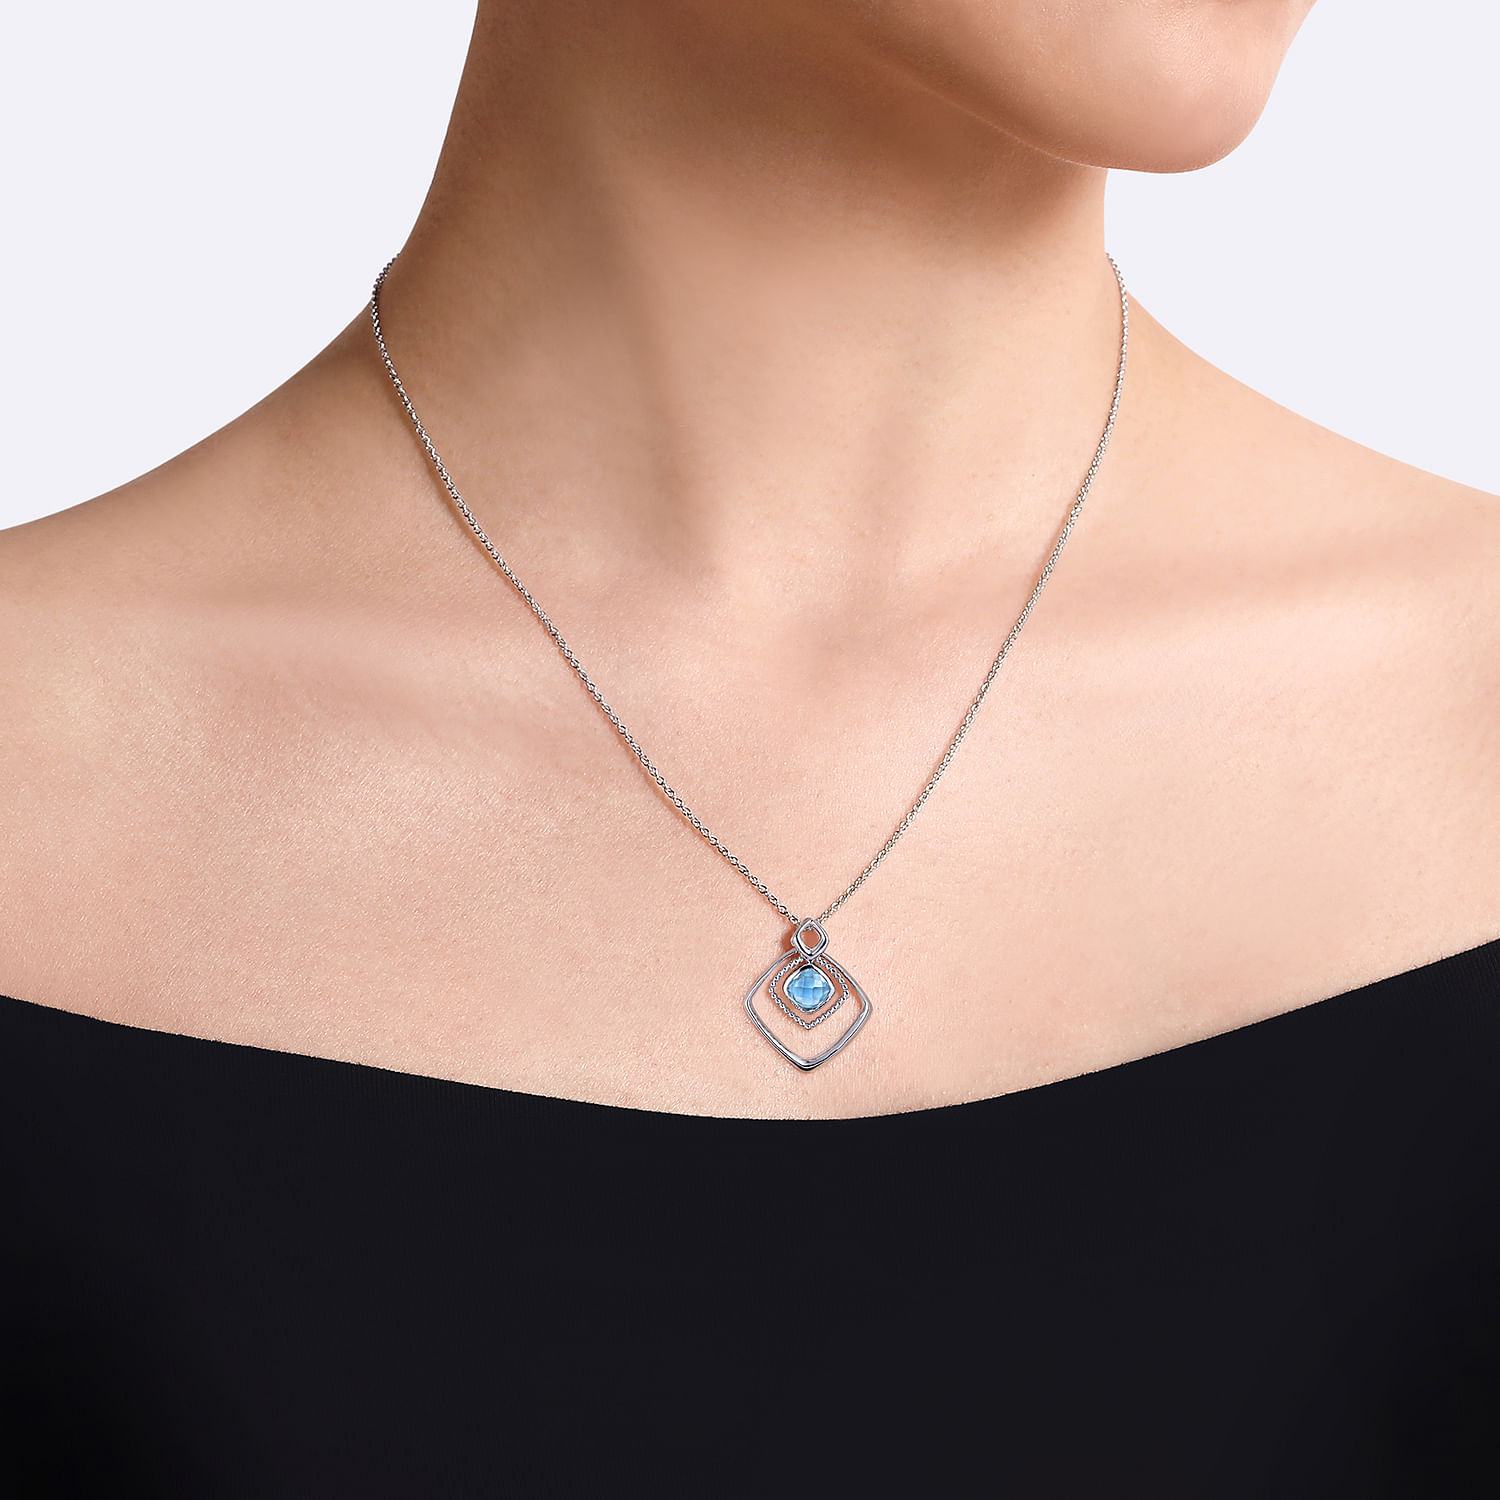 925 Sterling Silver Layered Squares Pendant Necklace with Blue Topaz Drop